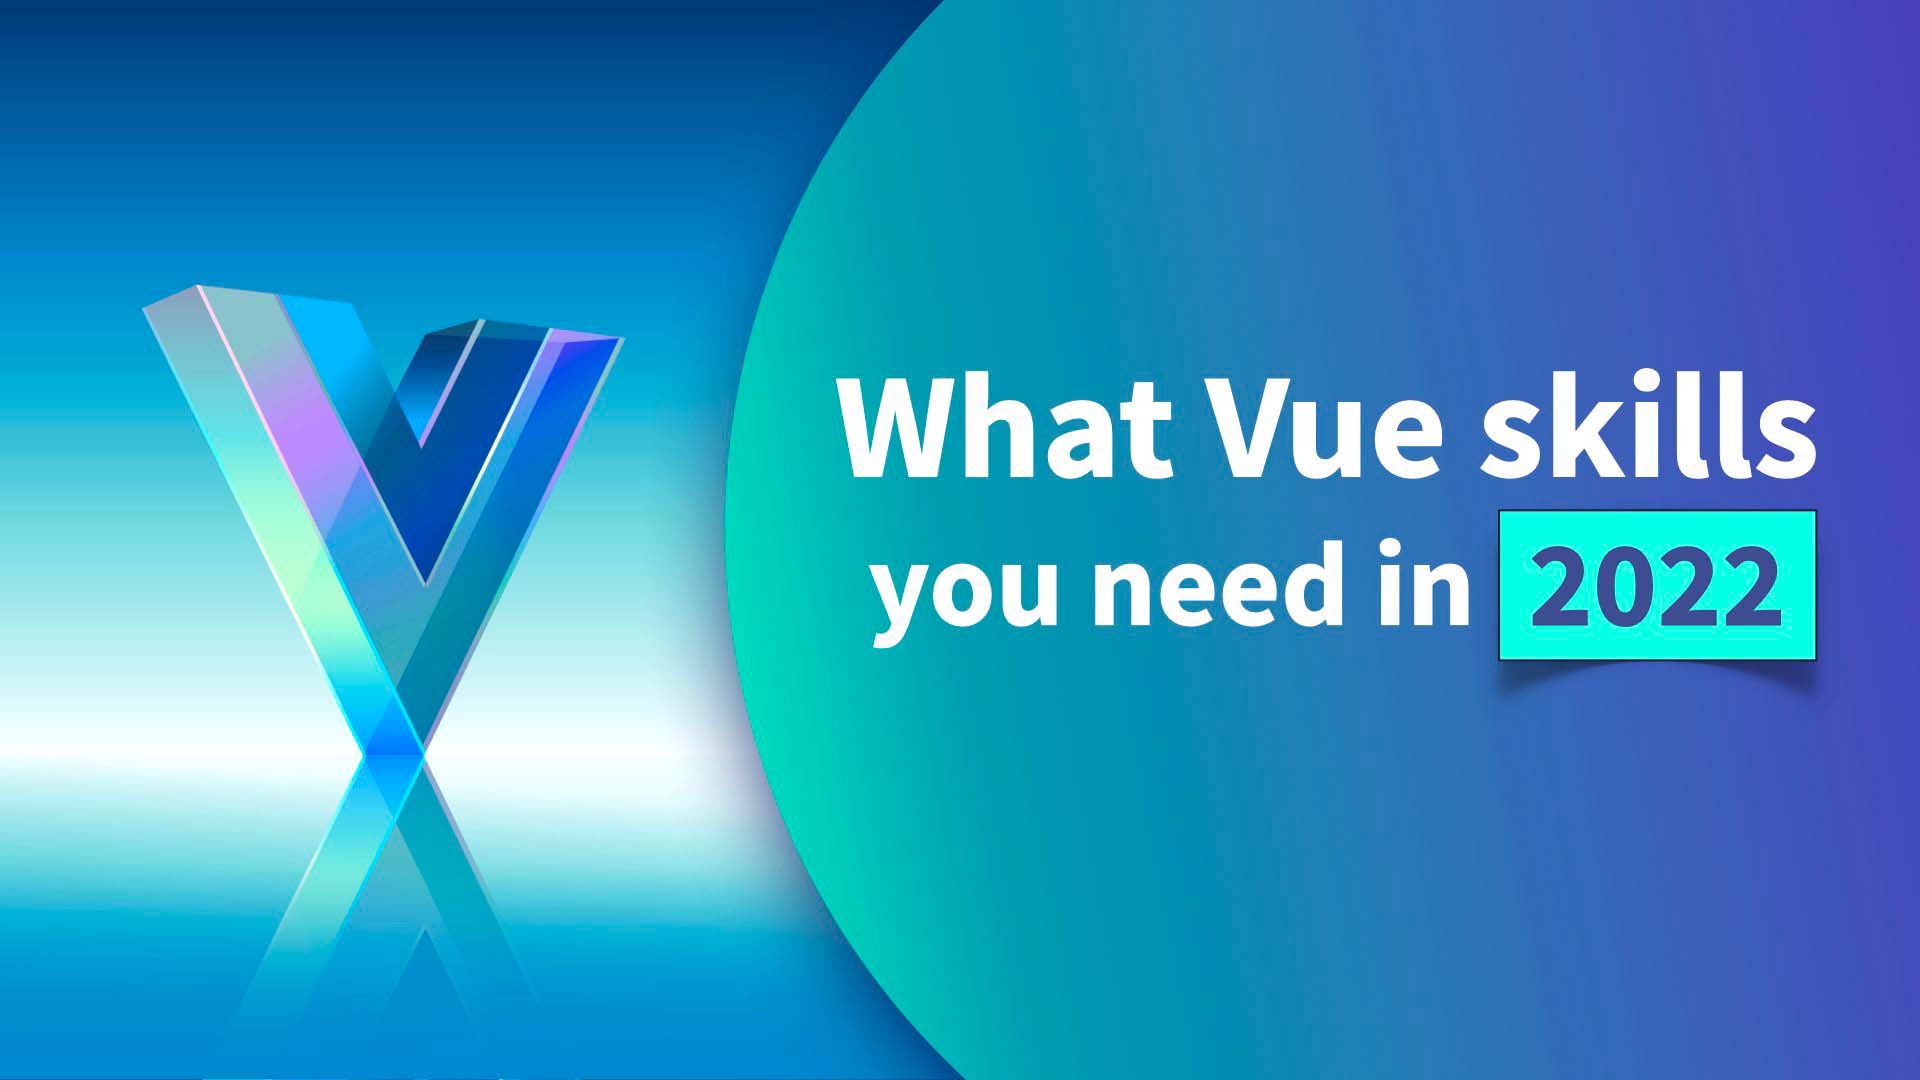 What Vue skills you need for 2022